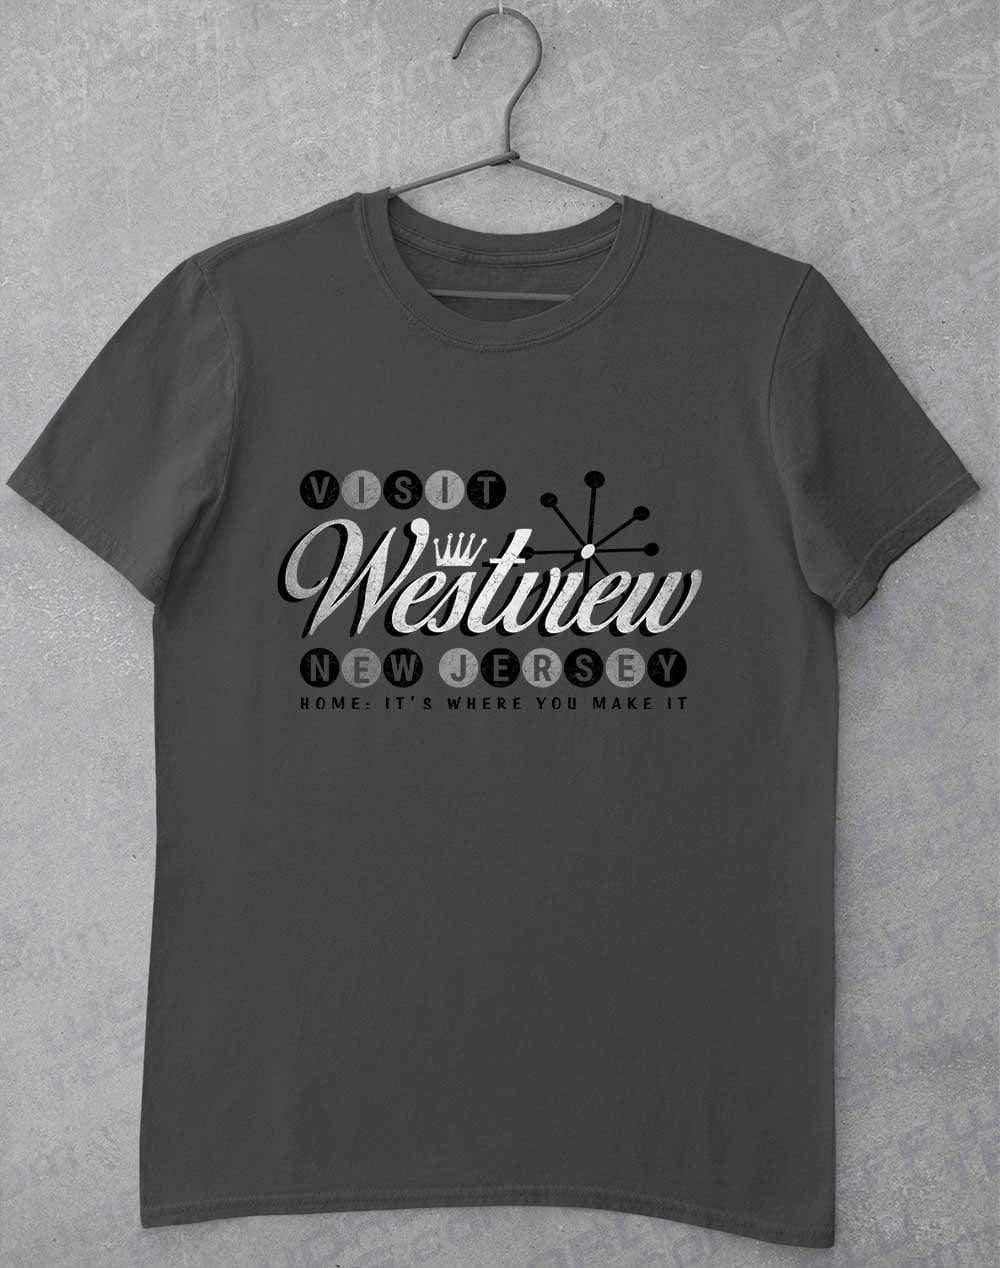 Visit Westview New Jersey T-Shirt S / Charcoal  - Off World Tees